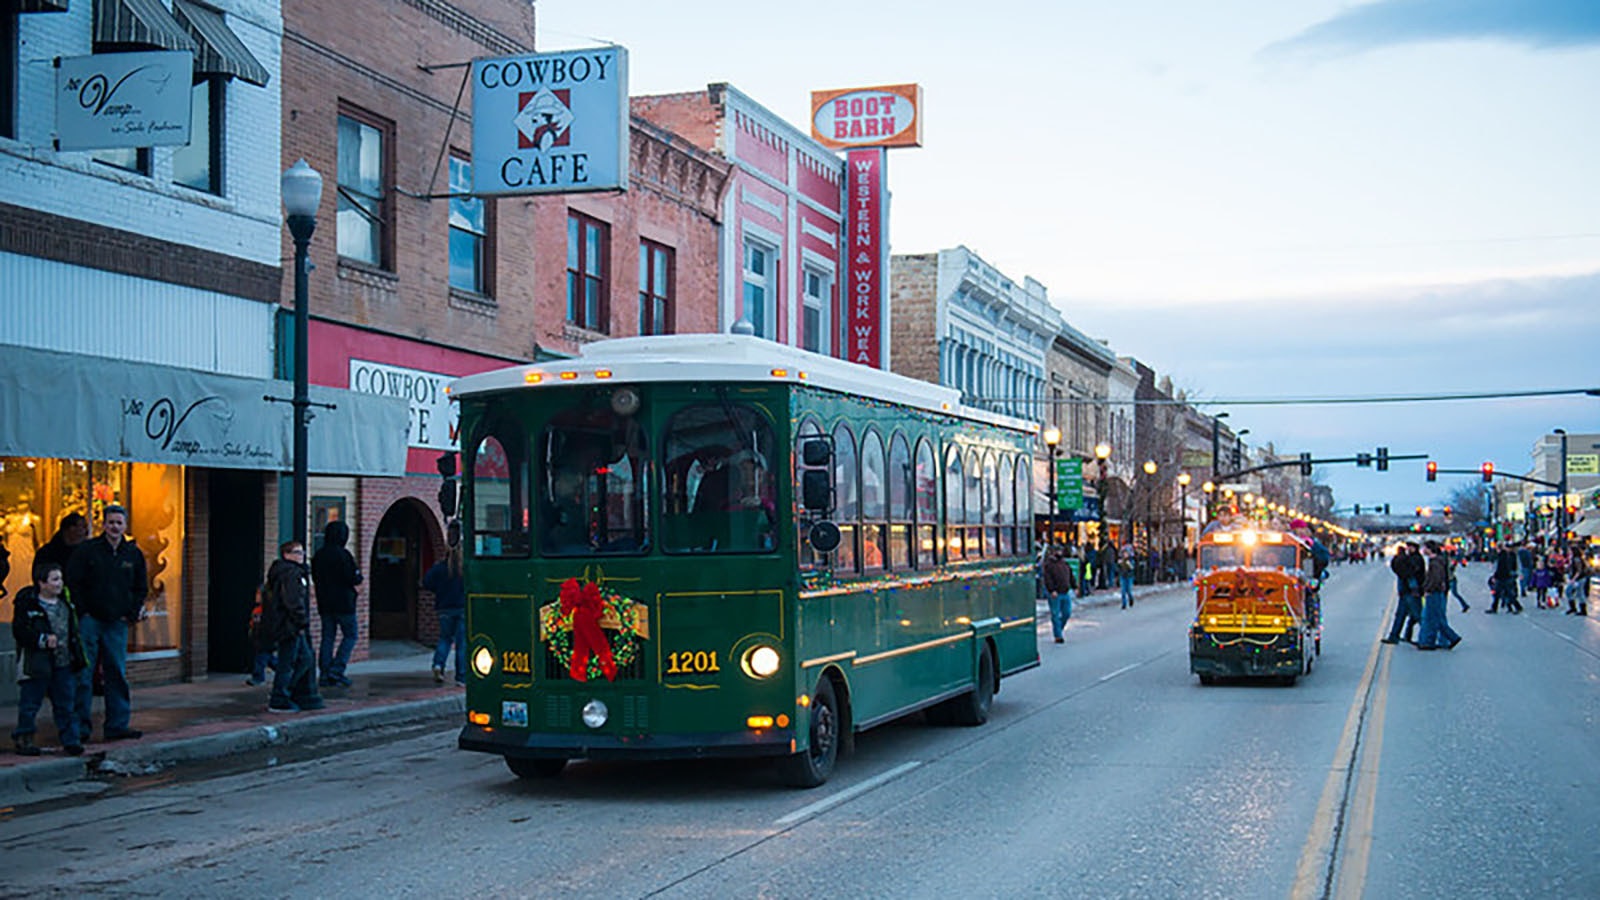 A throwback to the days when electric trolley cars moved up and down the main street of Sheridan, Wyoming, a motorized coach gives rides through the city.